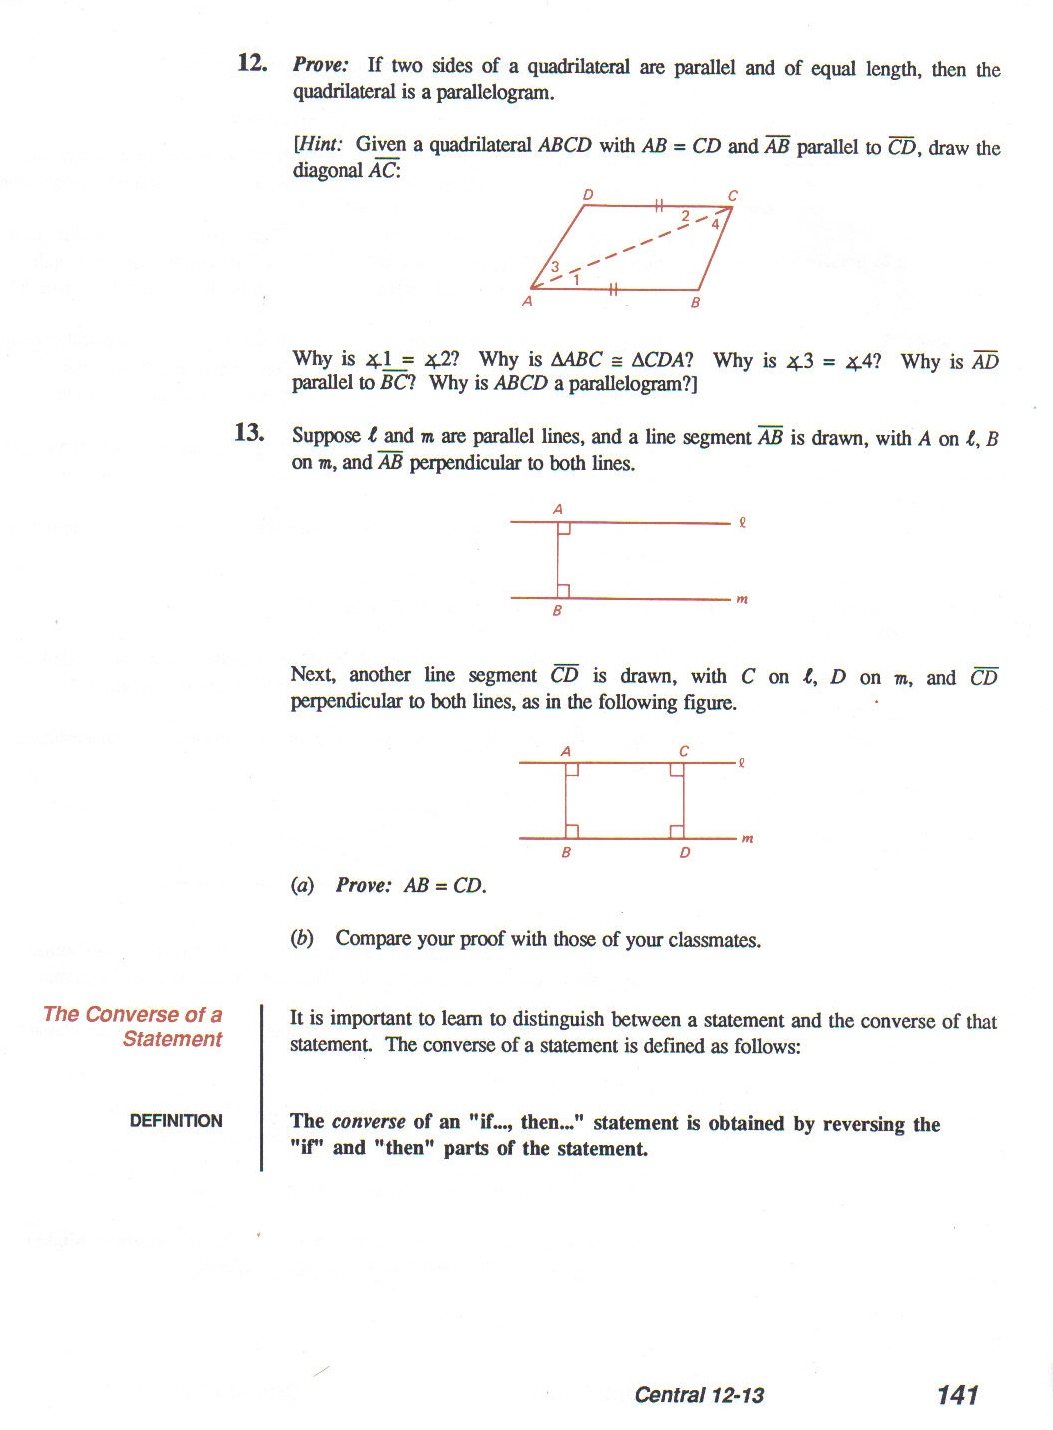 Geometry Worksheet Beginning Proofs Answers - Promotiontablecovers Pertaining To Geometry Worksheet Beginning Proofs